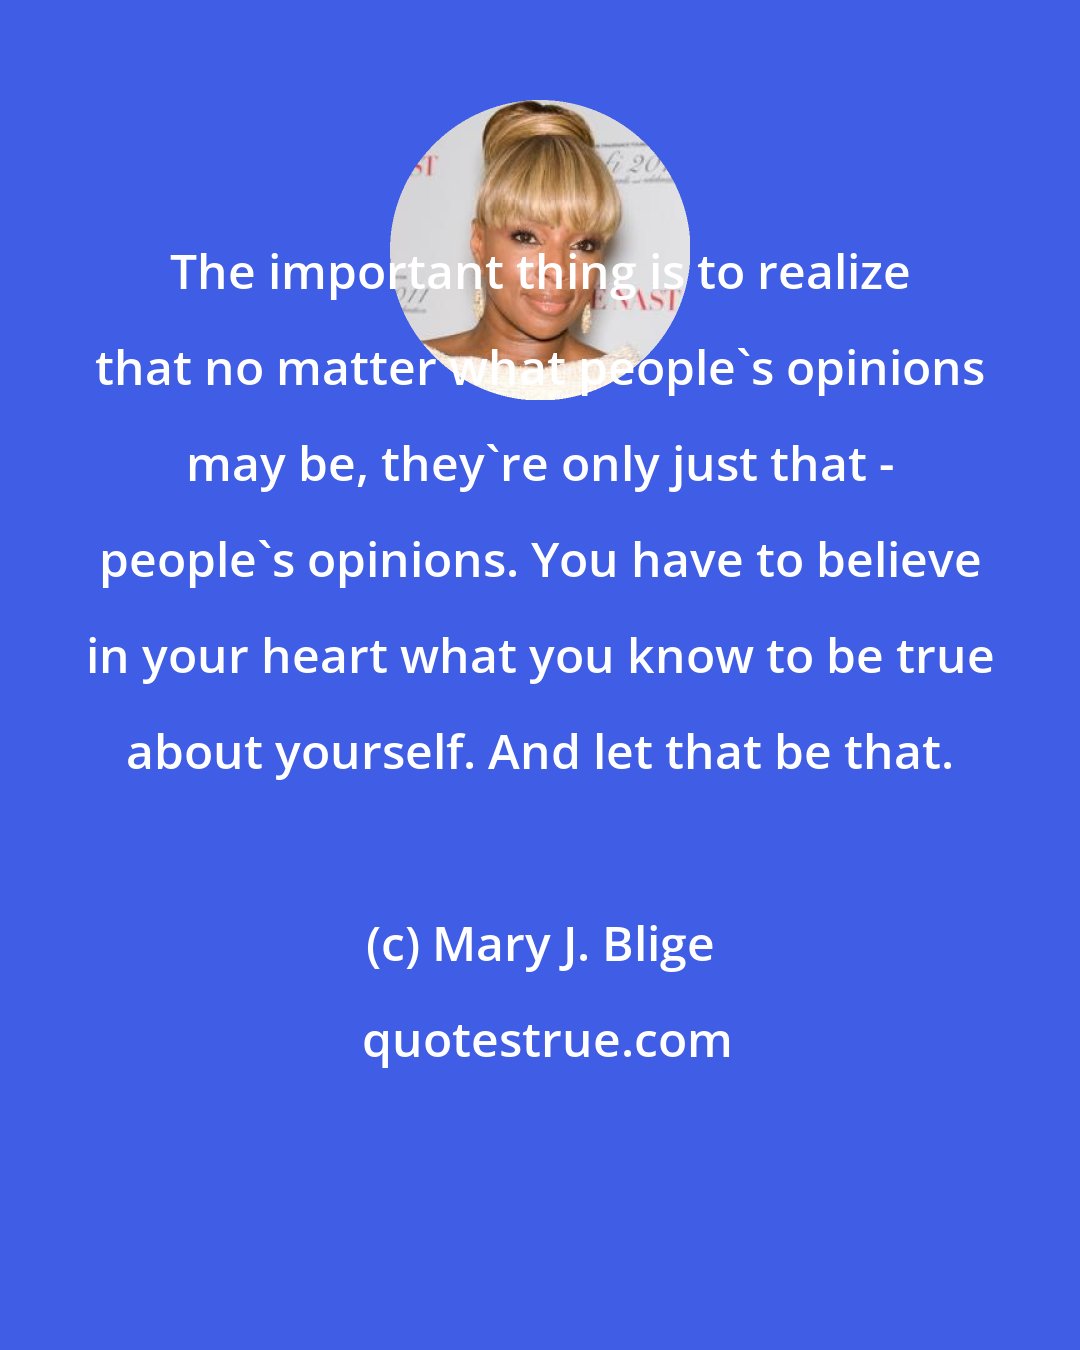 Mary J. Blige: The important thing is to realize that no matter what people's opinions may be, they're only just that - people's opinions. You have to believe in your heart what you know to be true about yourself. And let that be that.